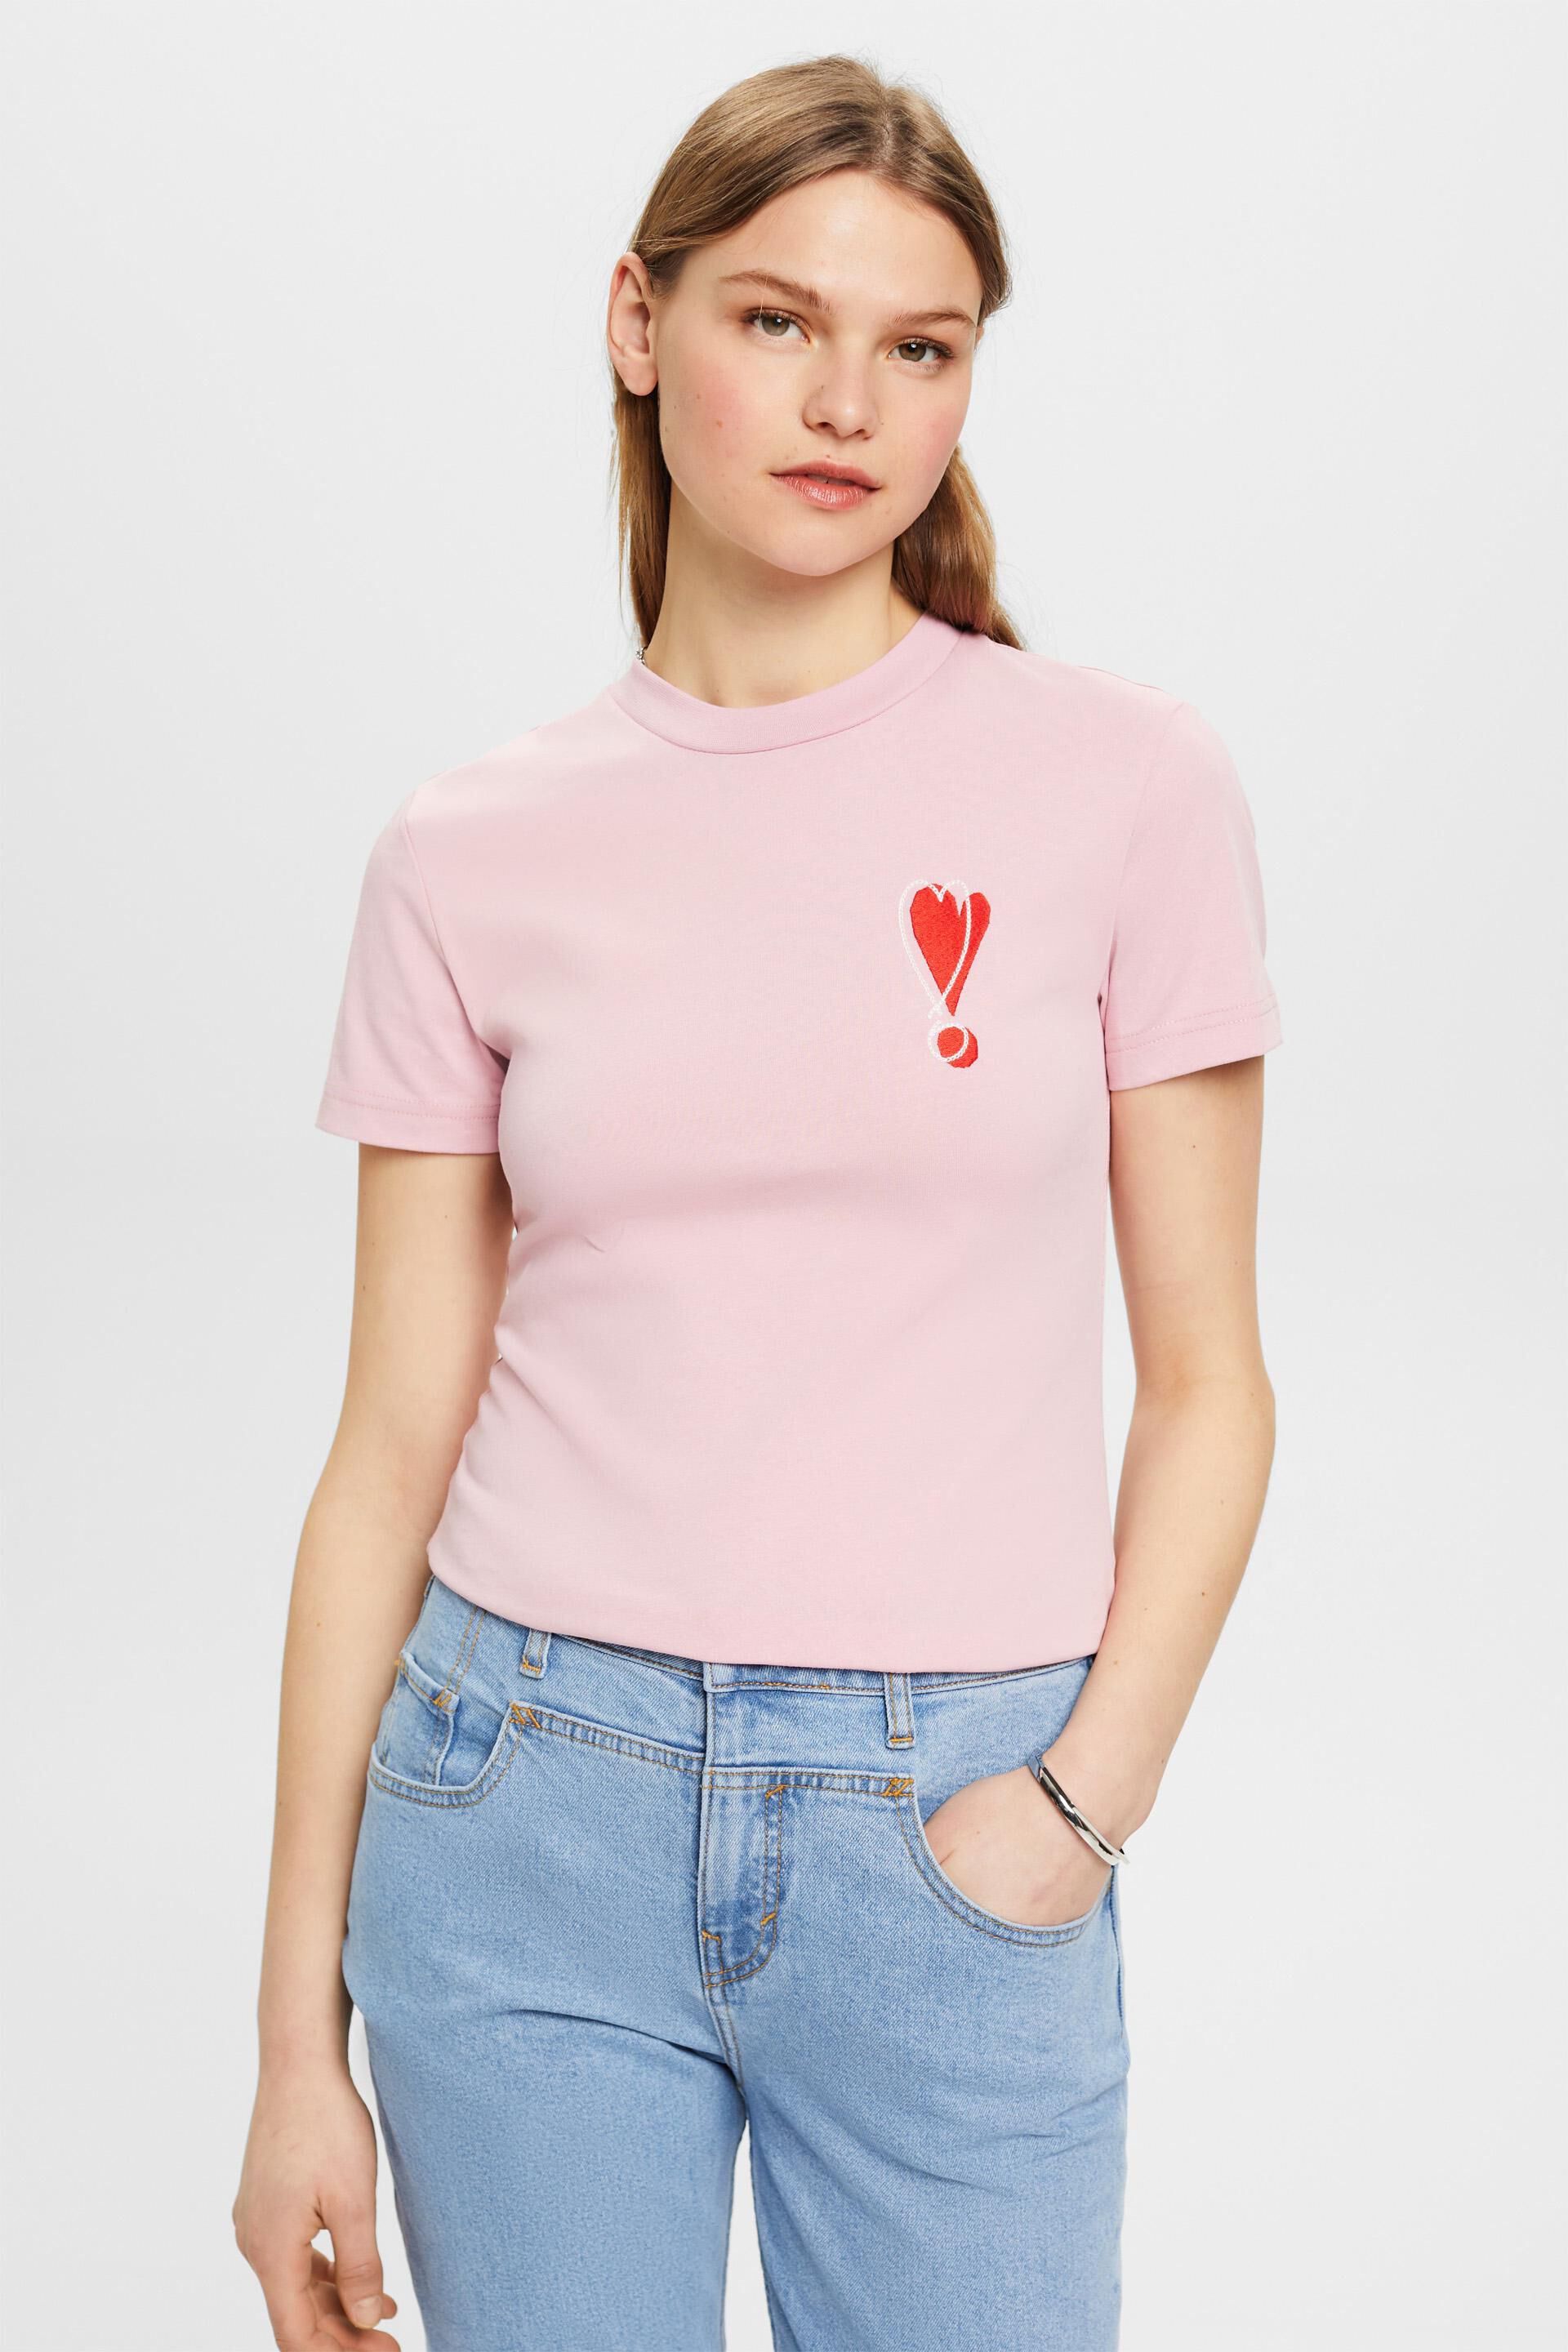 Esprit T-shirt embroidered Cotton with heart motif